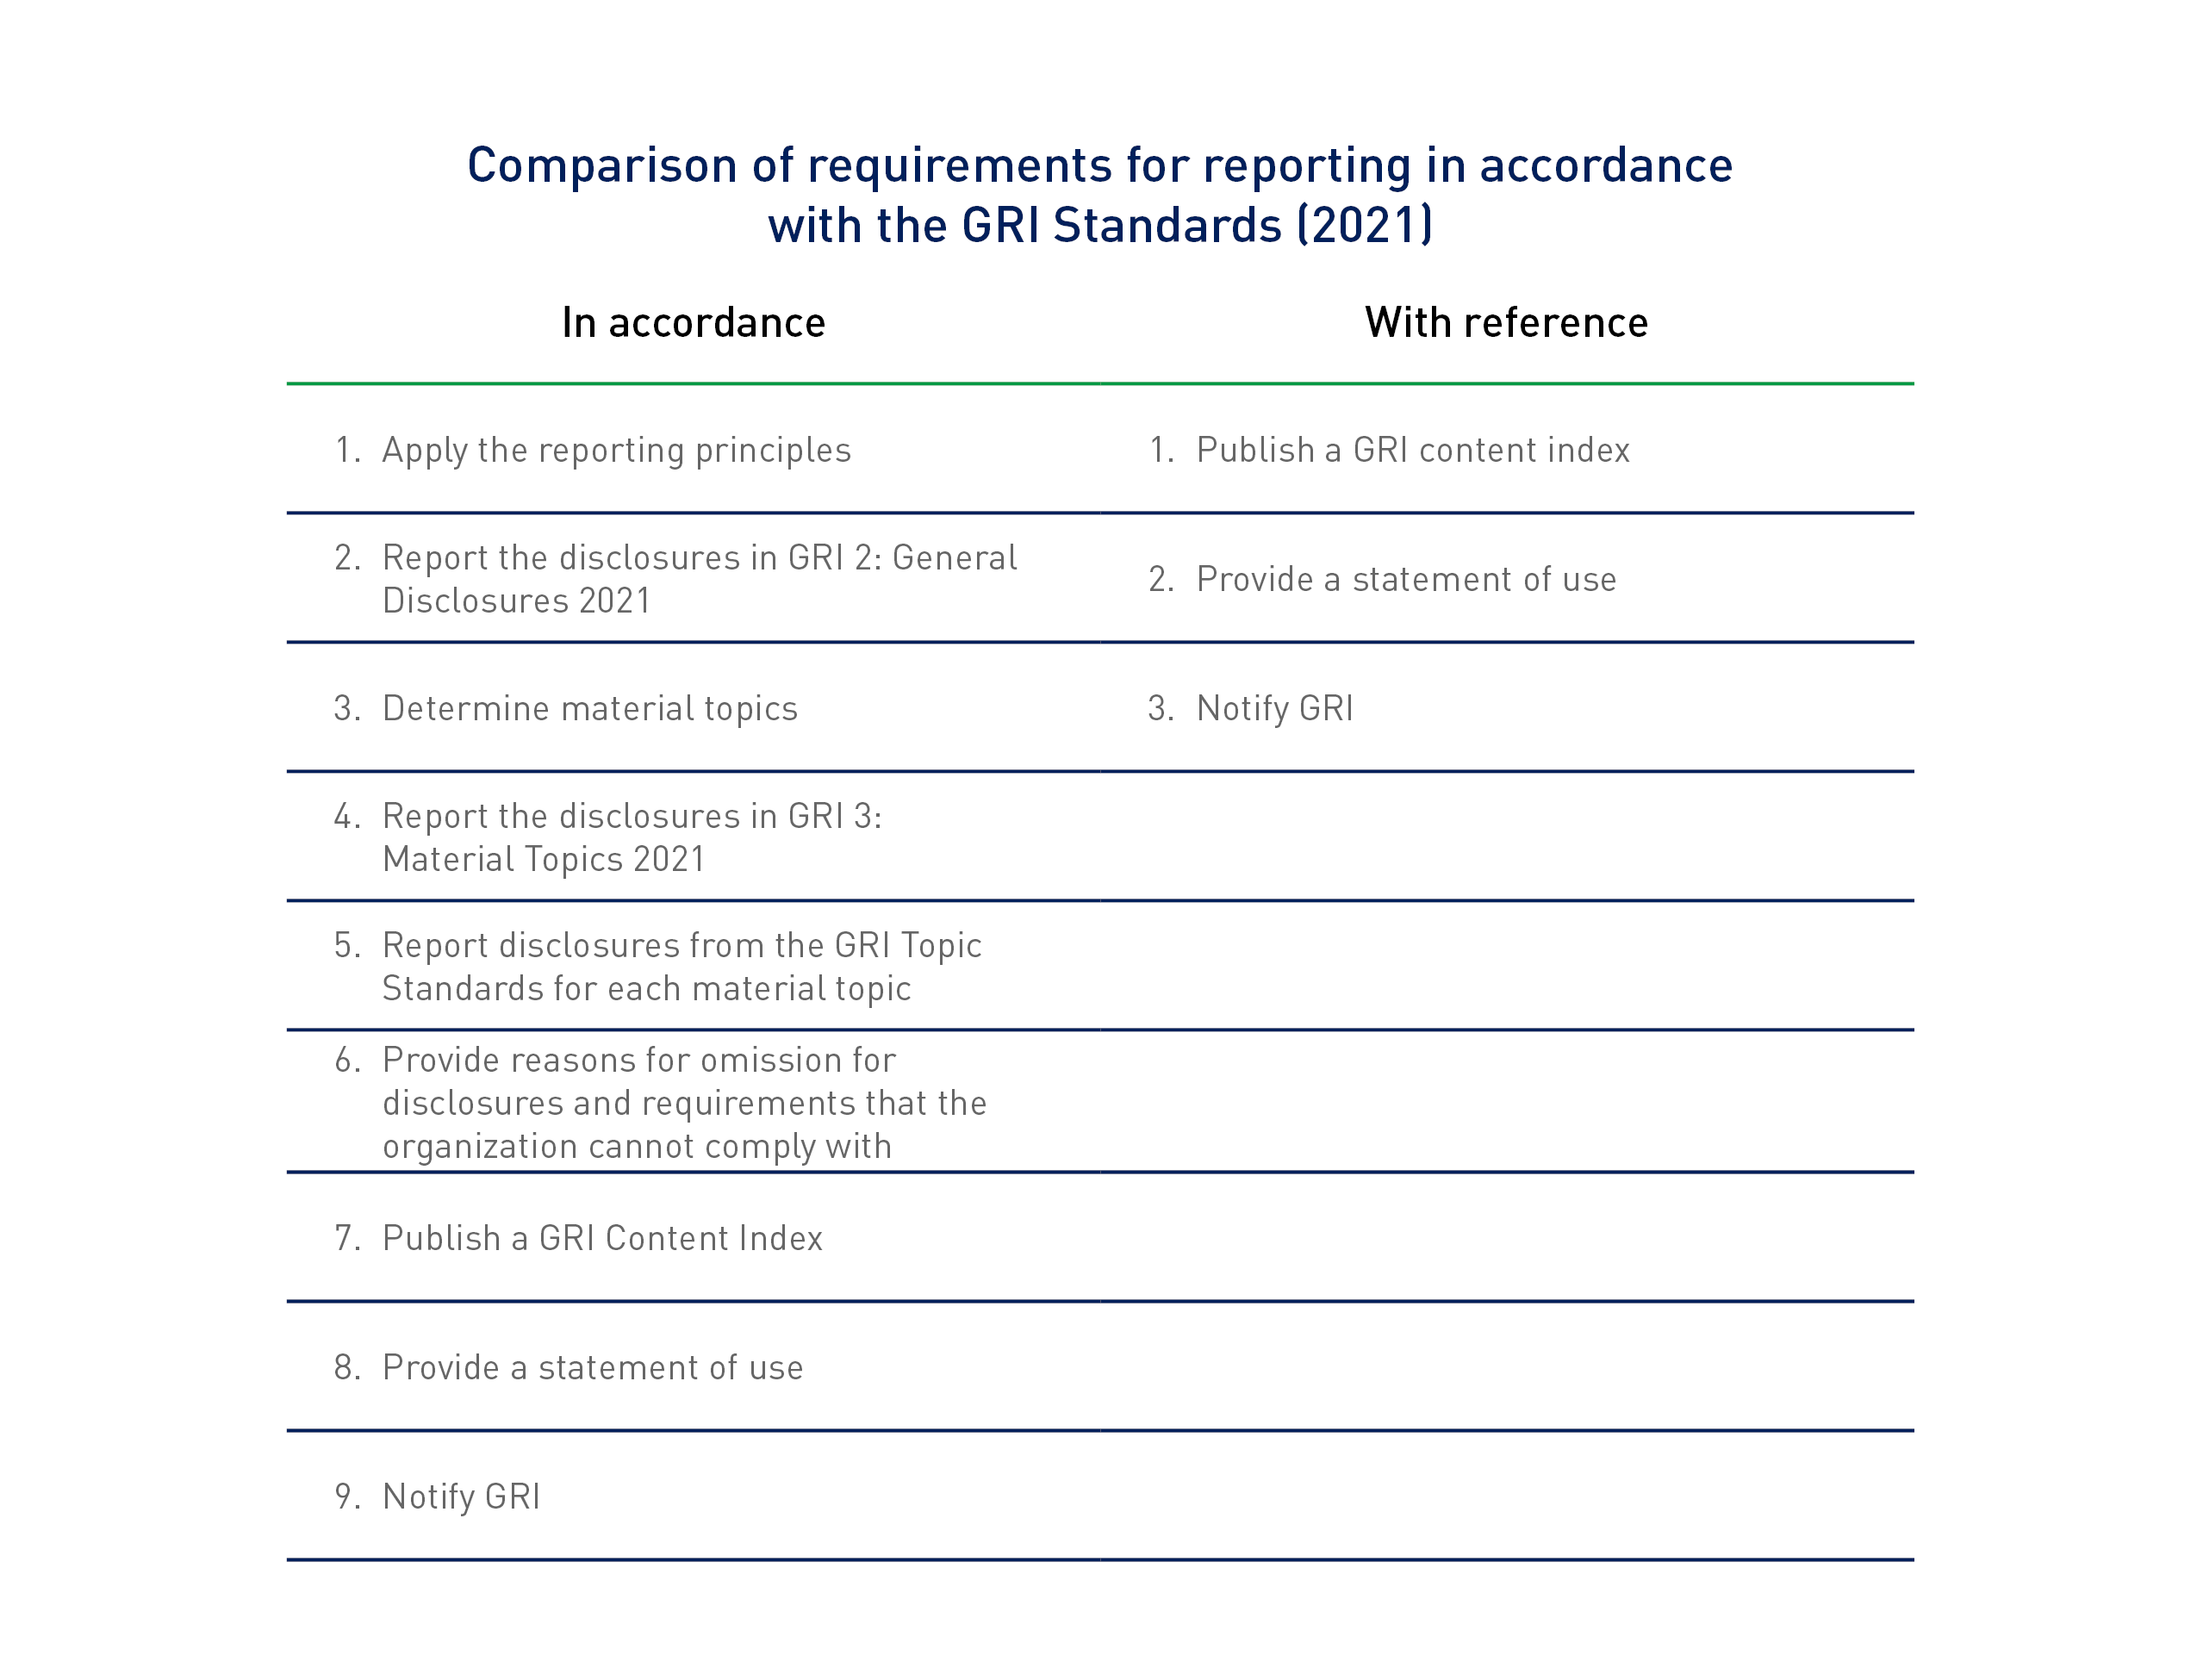 Table comparing requirements for reporting with the GRI Standards, “in accordance” vs “with reference” 